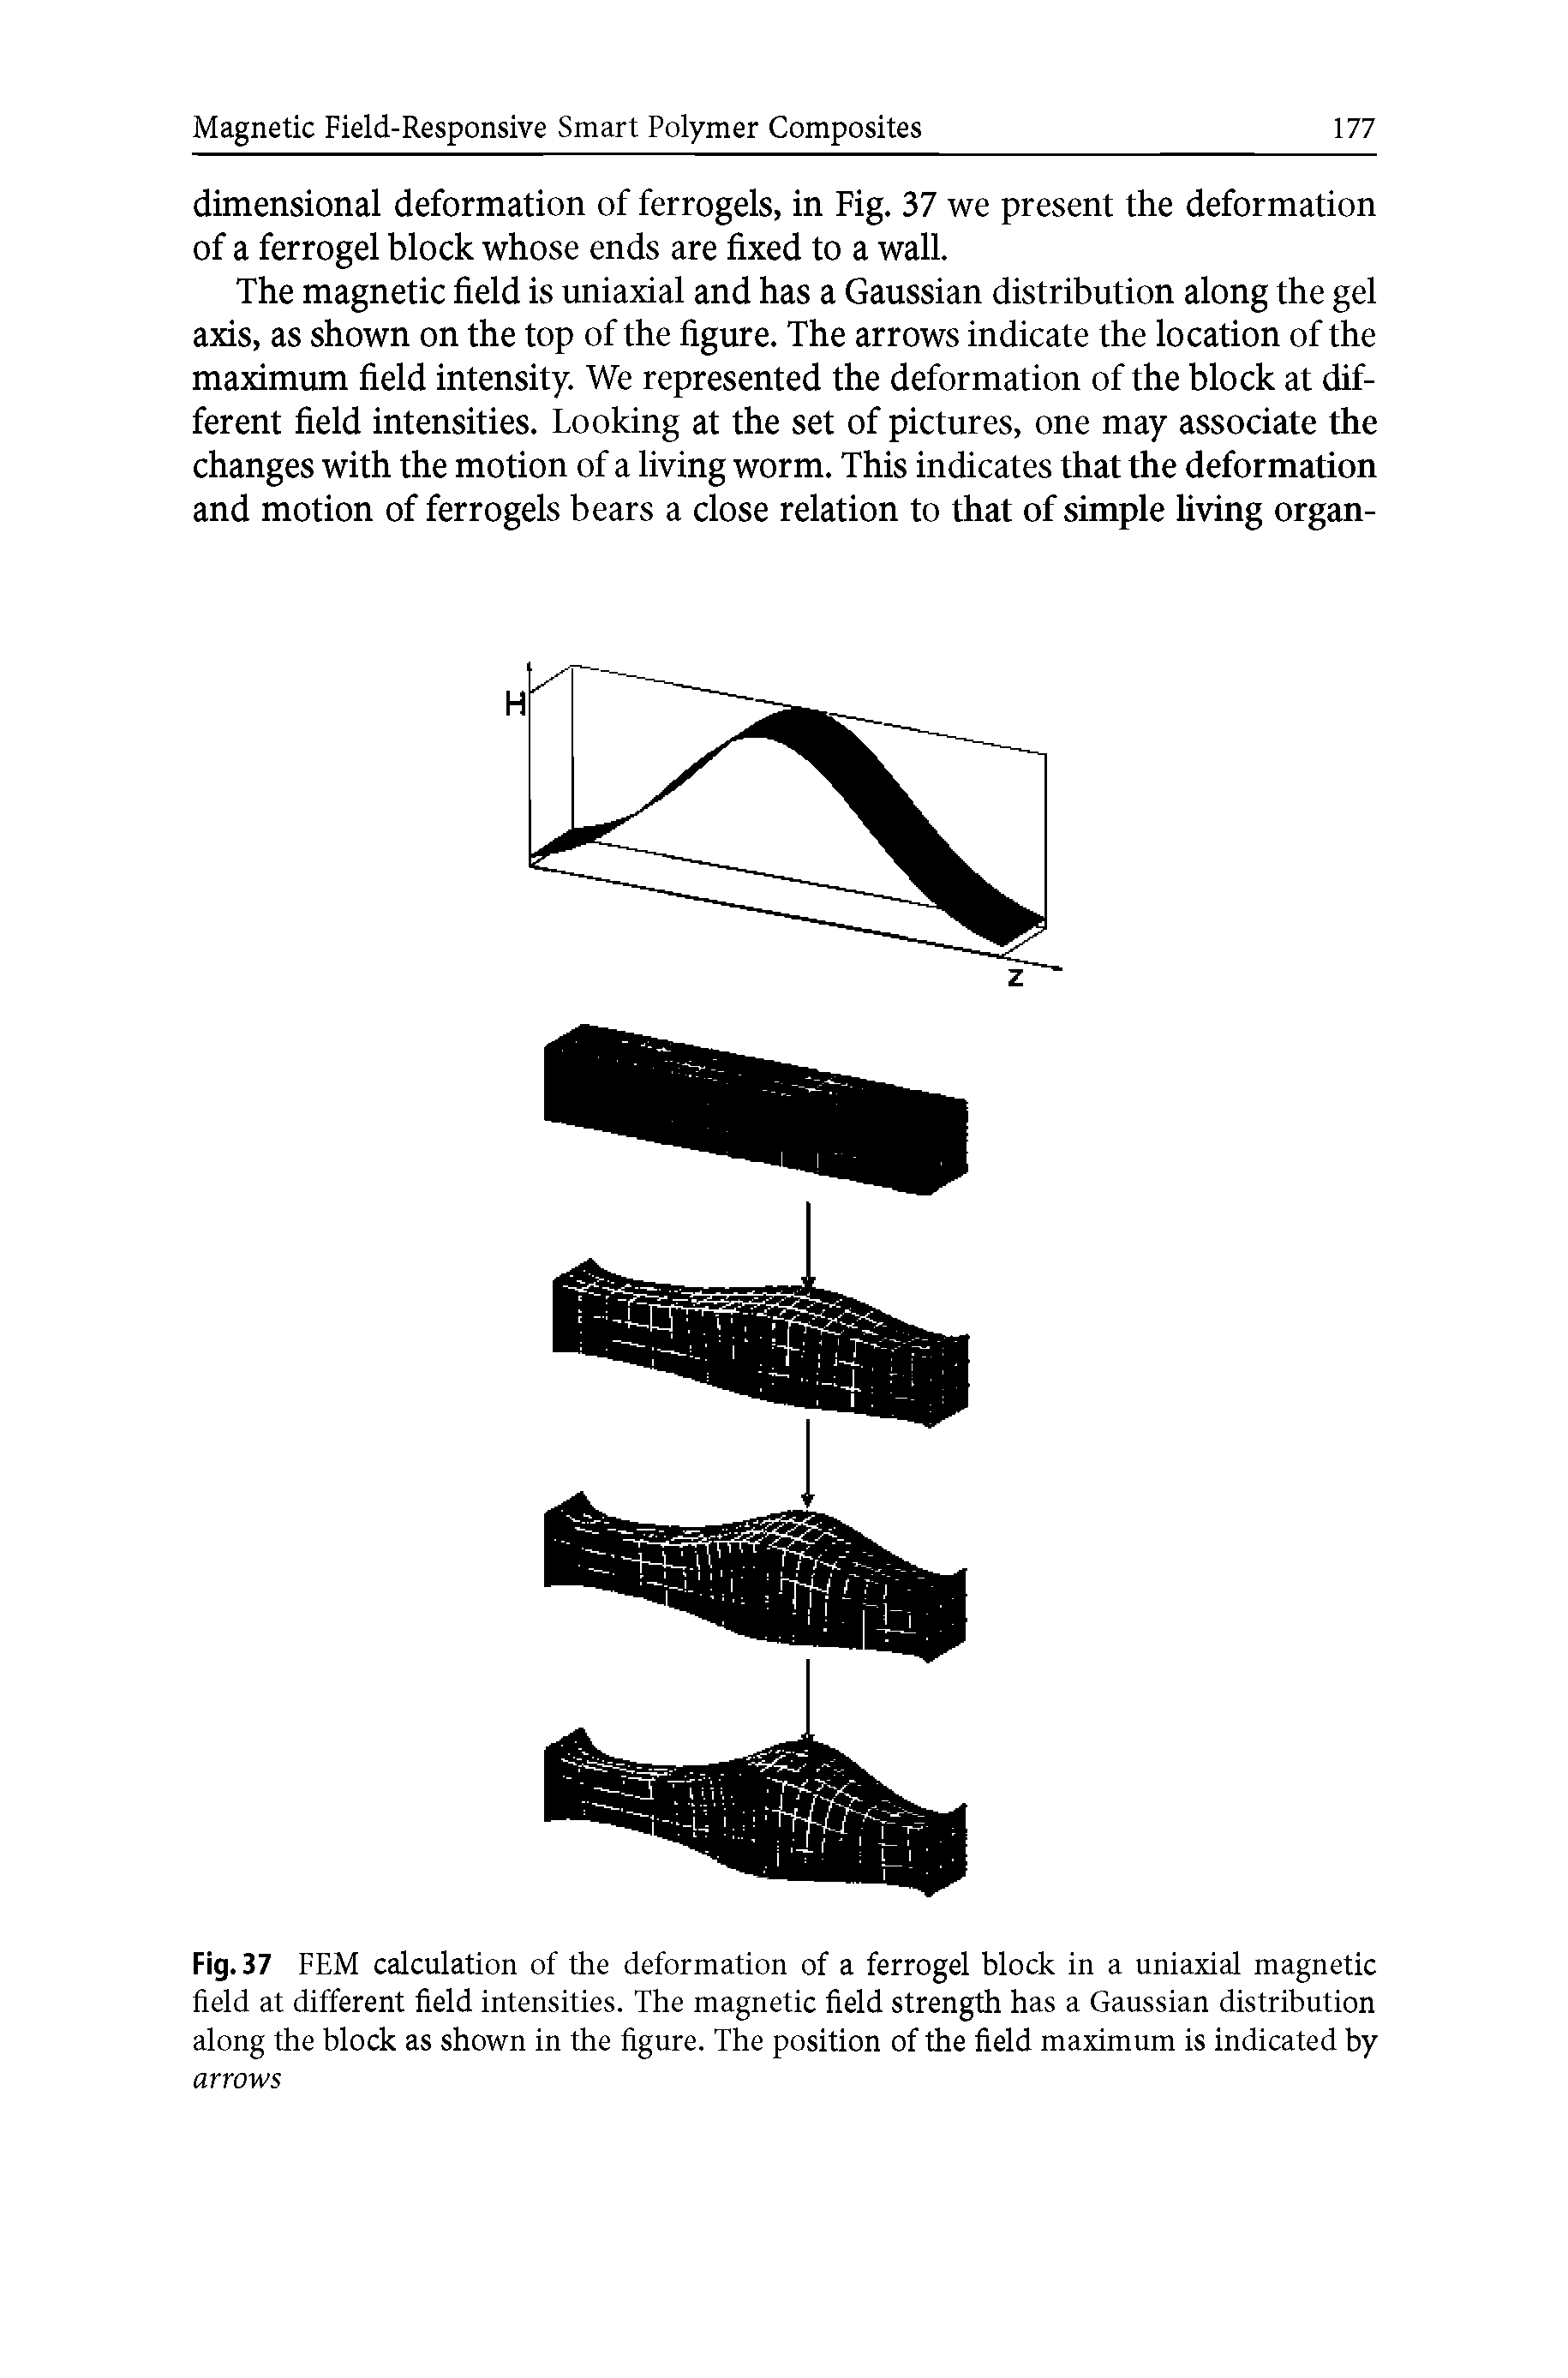 Fig.37 FEM calculation of the deformation of a ferrogel block in a uniaxial magnetic field at different field intensities. The magnetic field strength has a Gaussian distribution along the block as shown in the figure. The position of the field maximum is indicated by arrows...